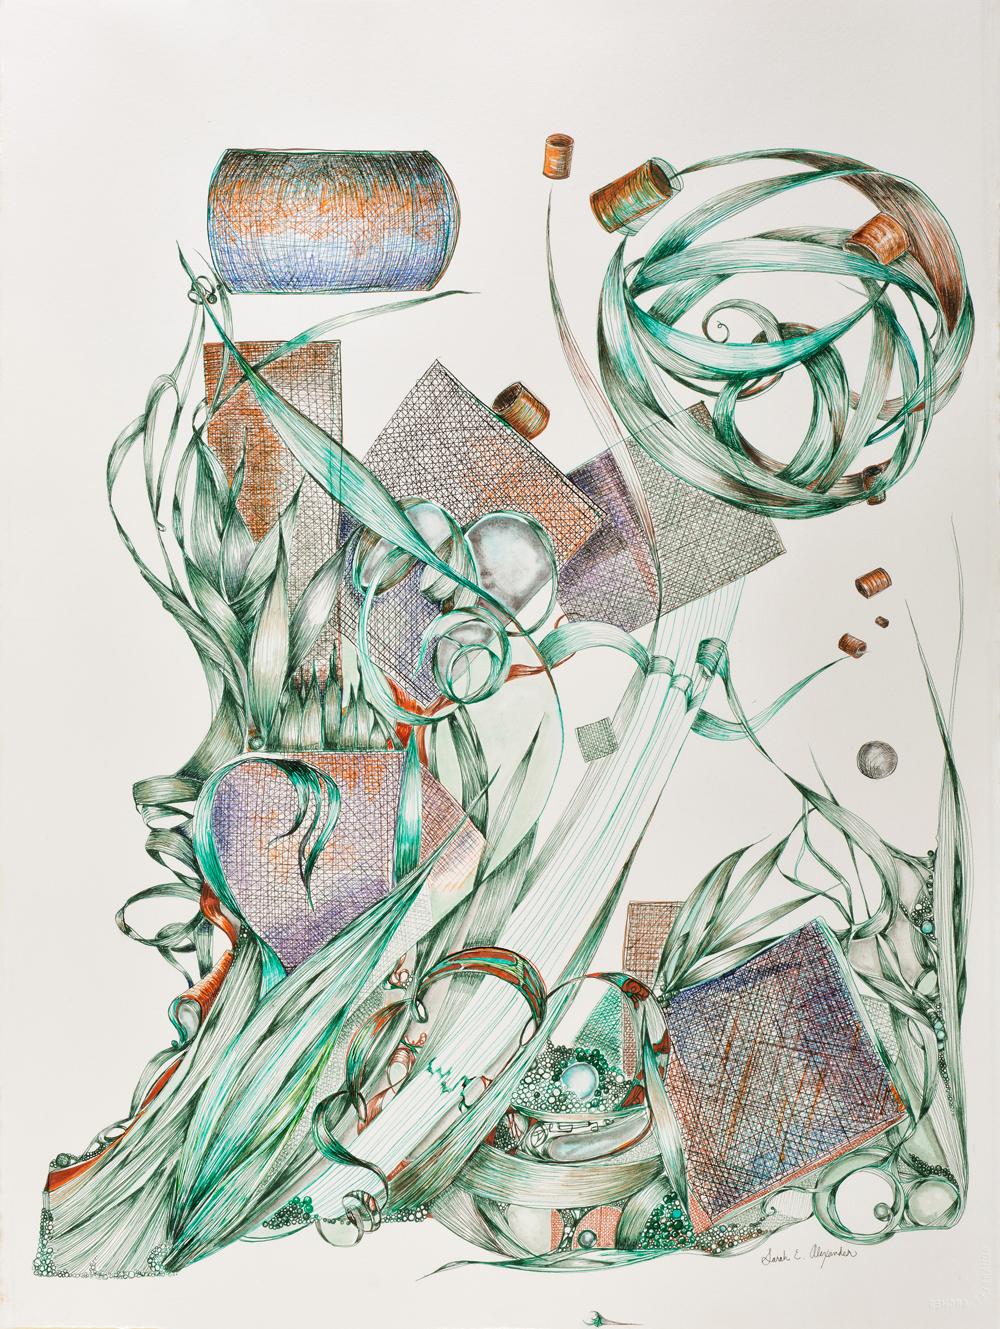 "Elude", contemporary, art deco, teal, green, amber, watercolor, drawing